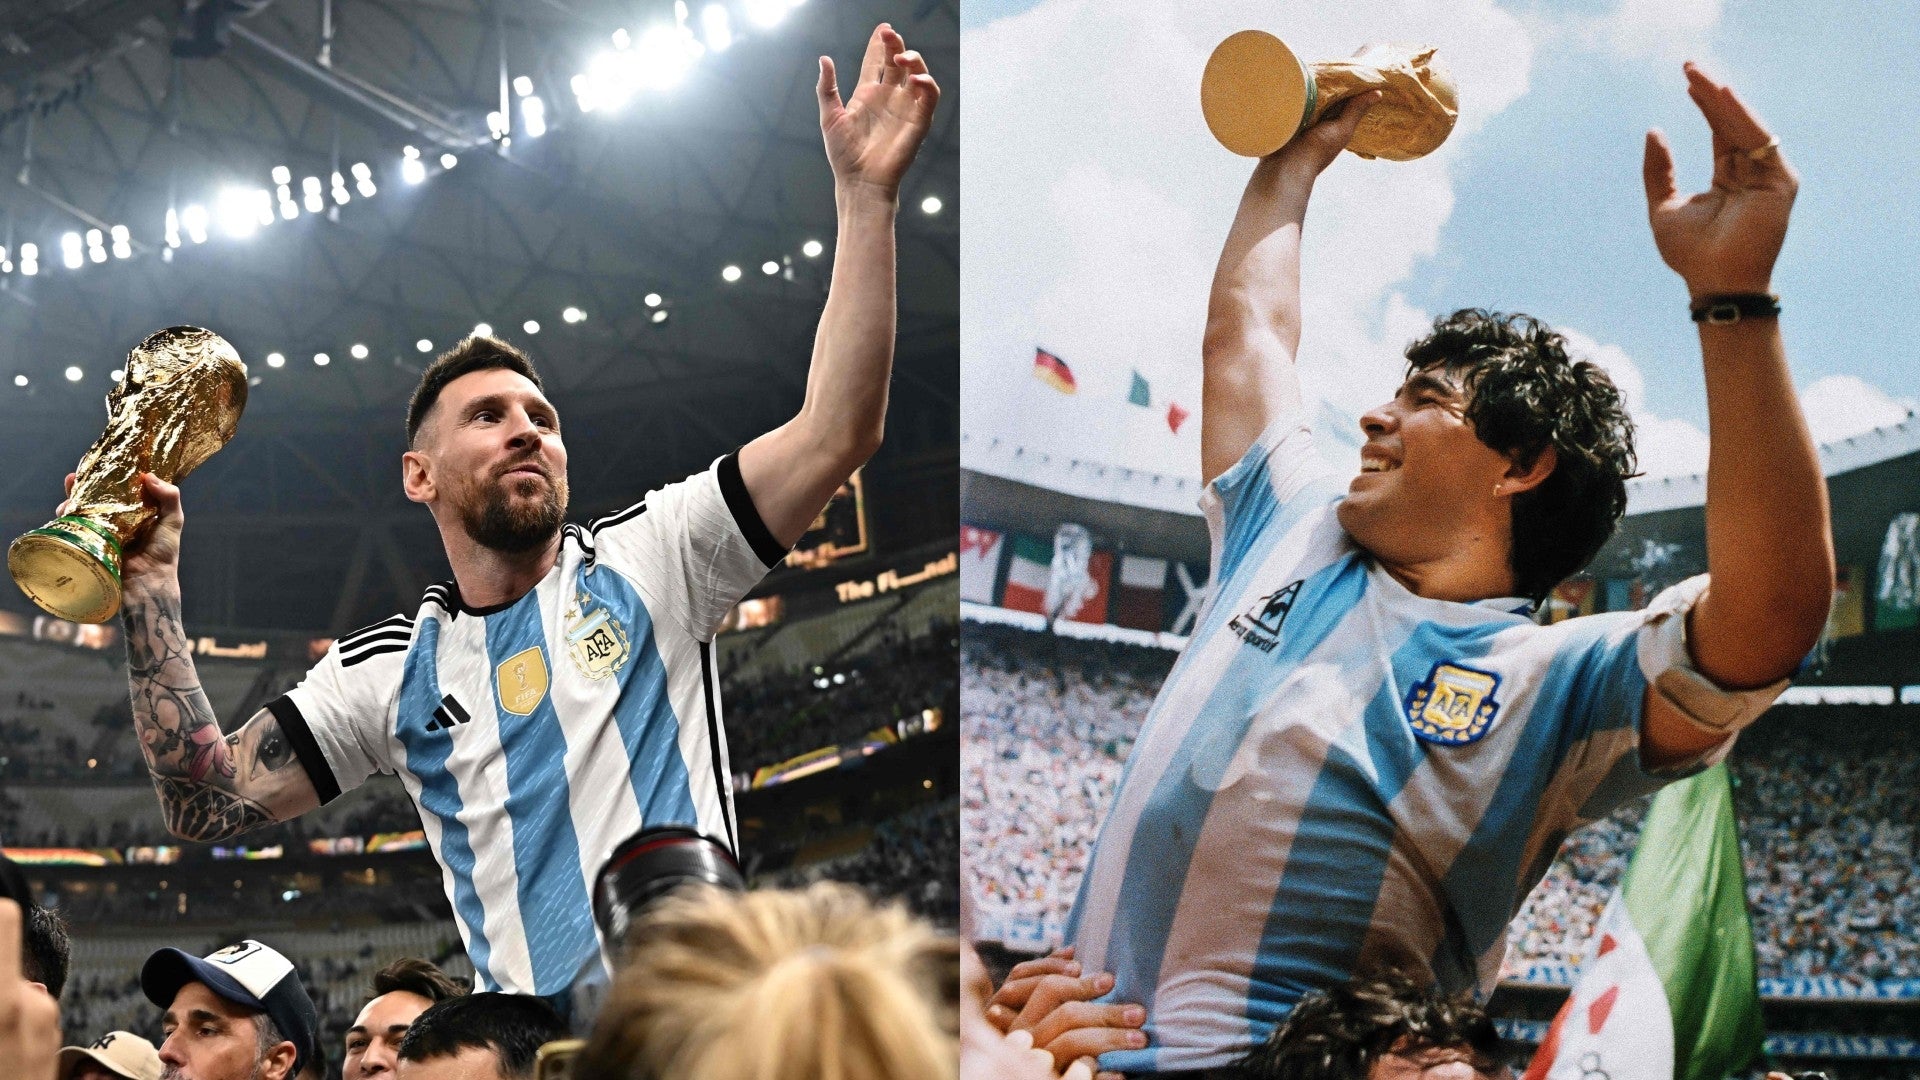 Lot of 4 Lionel Messi Argentina World Cup Champions - 8x10 Color Photos